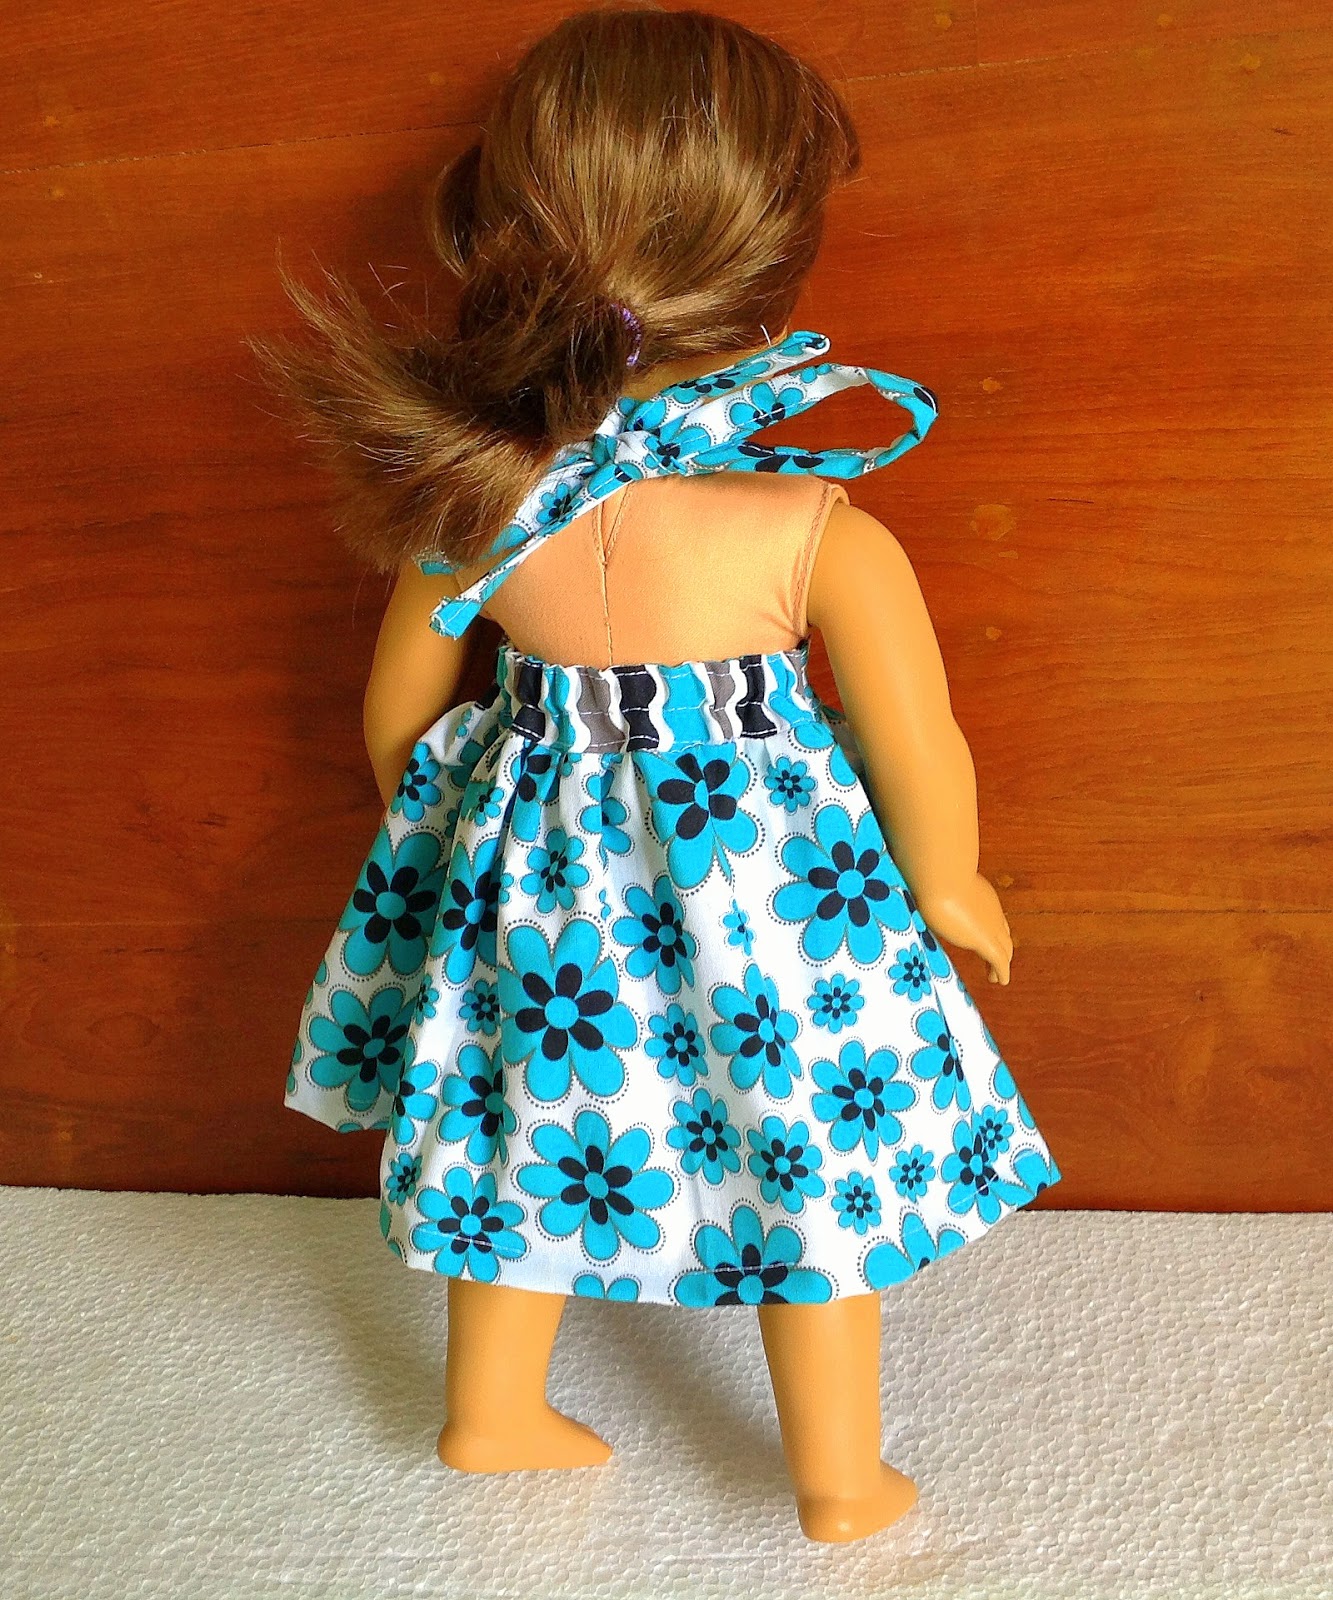 sewing-patterns-for-girls-dresses-and-skirts-american-doll-dress